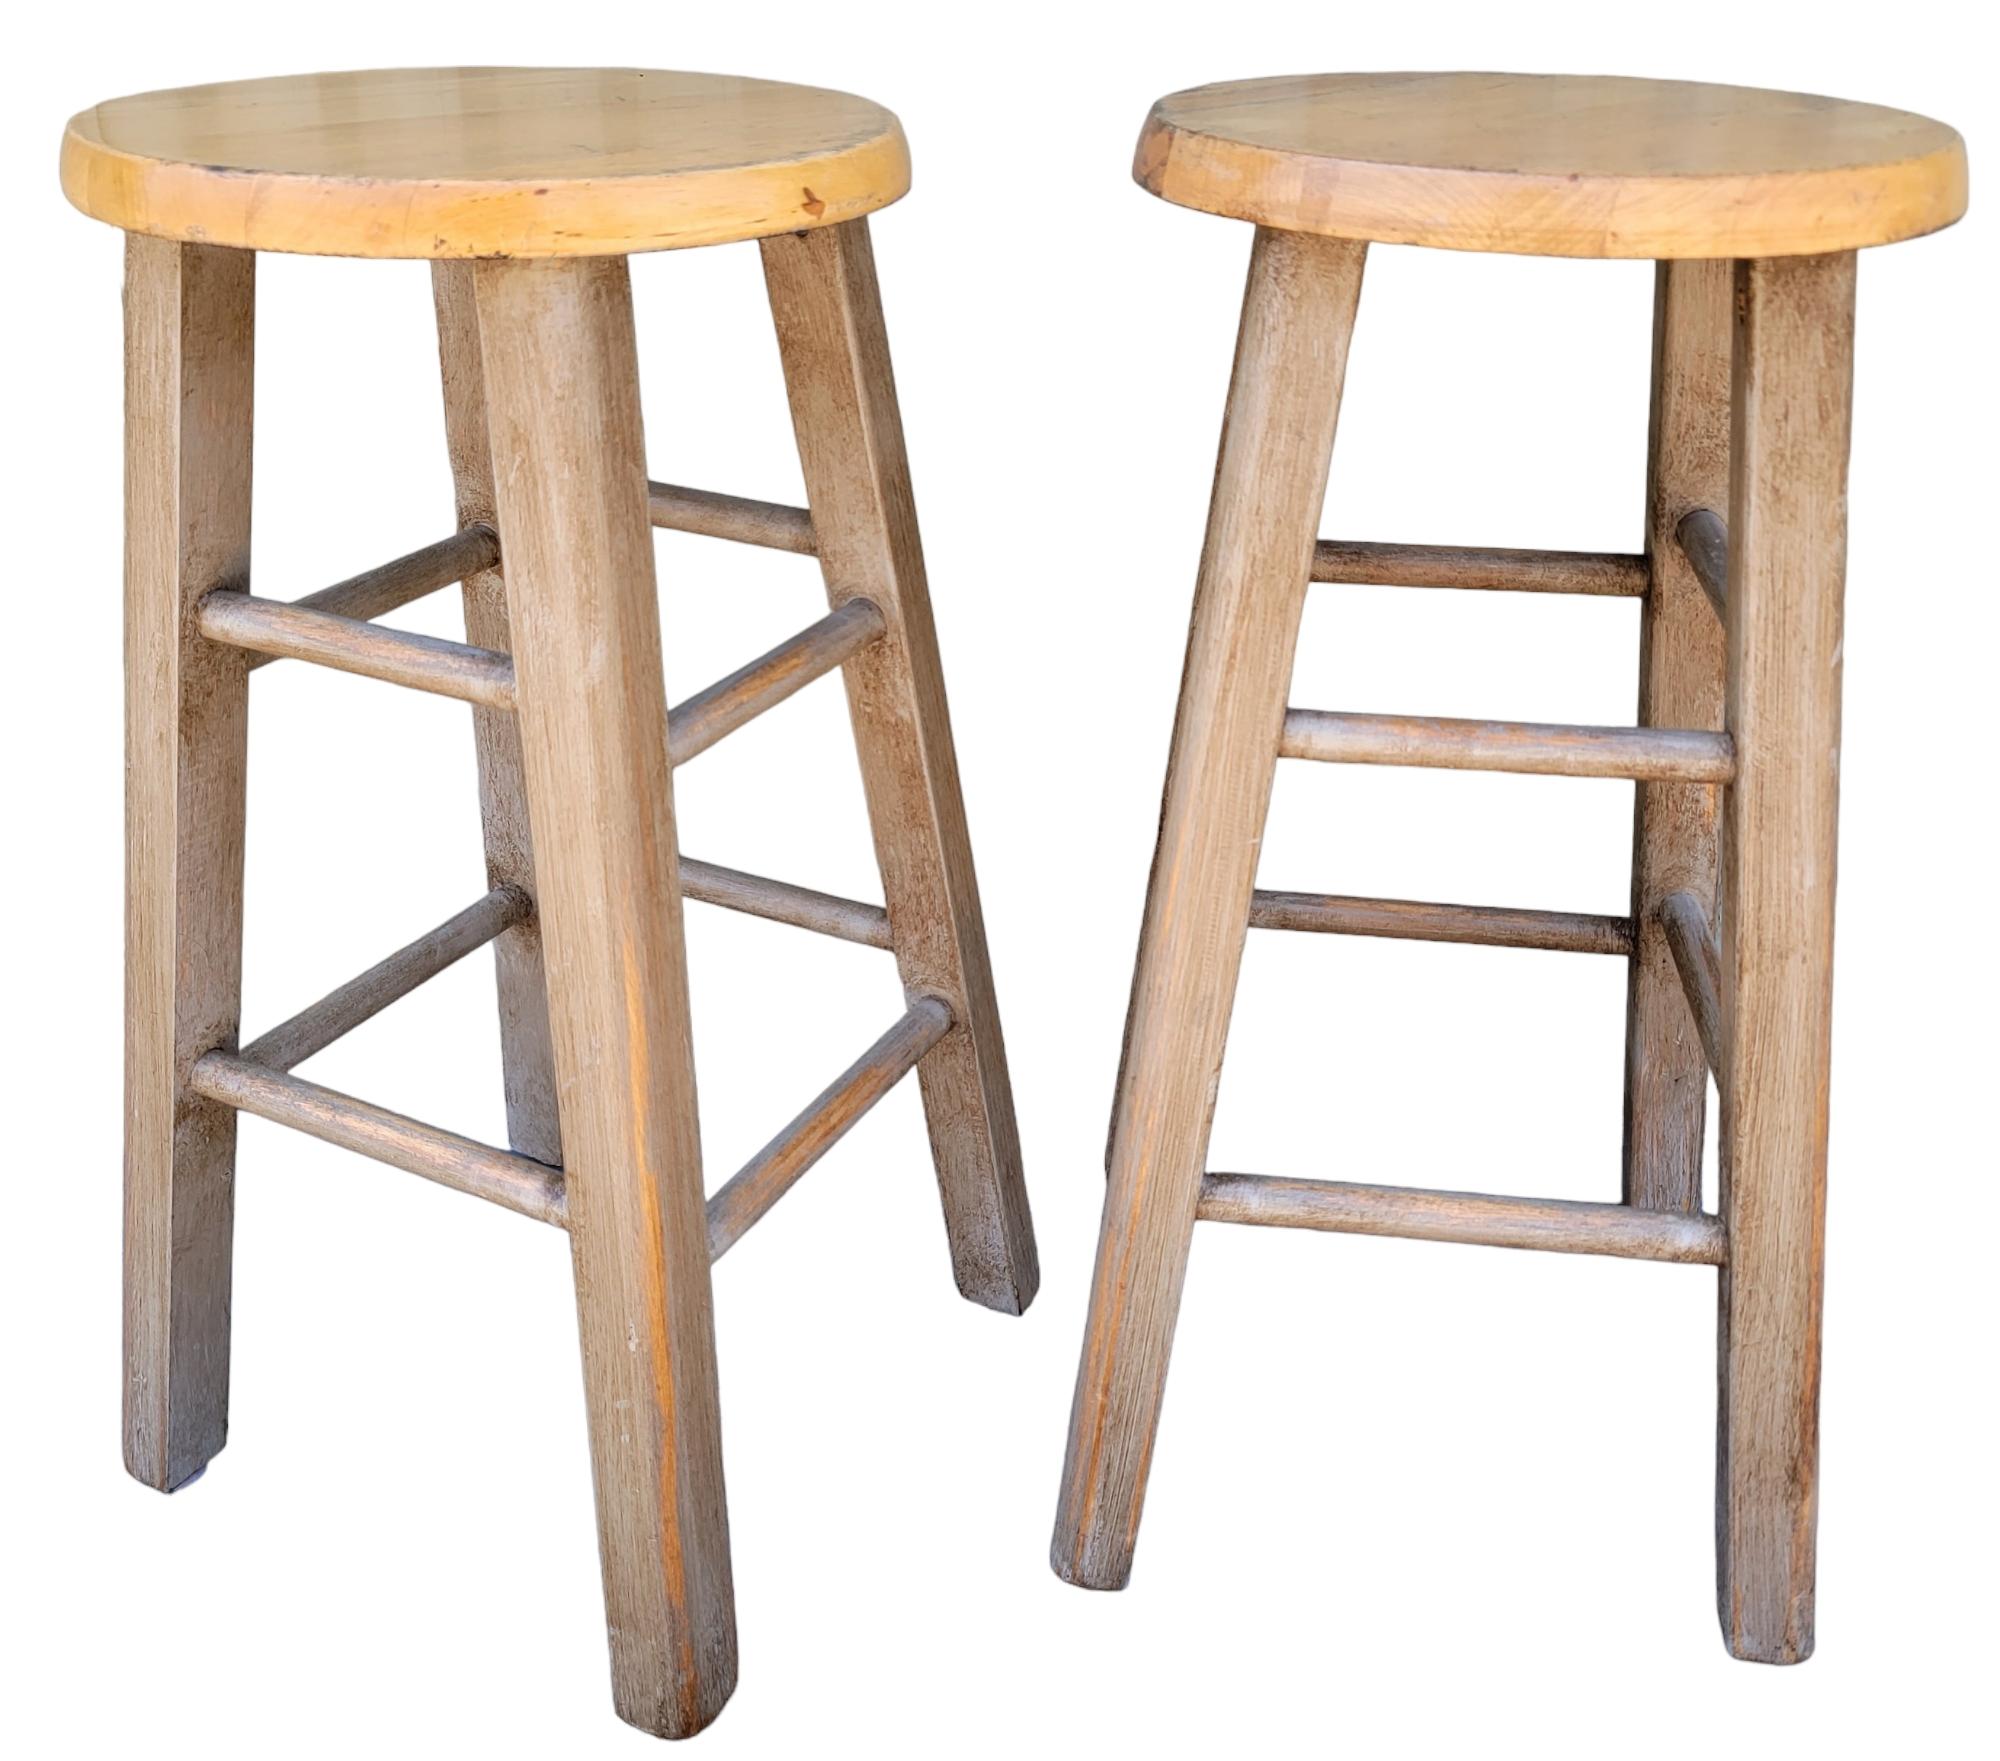 Hand-Painted Painted Taupe Bar Stools -Pair For Sale